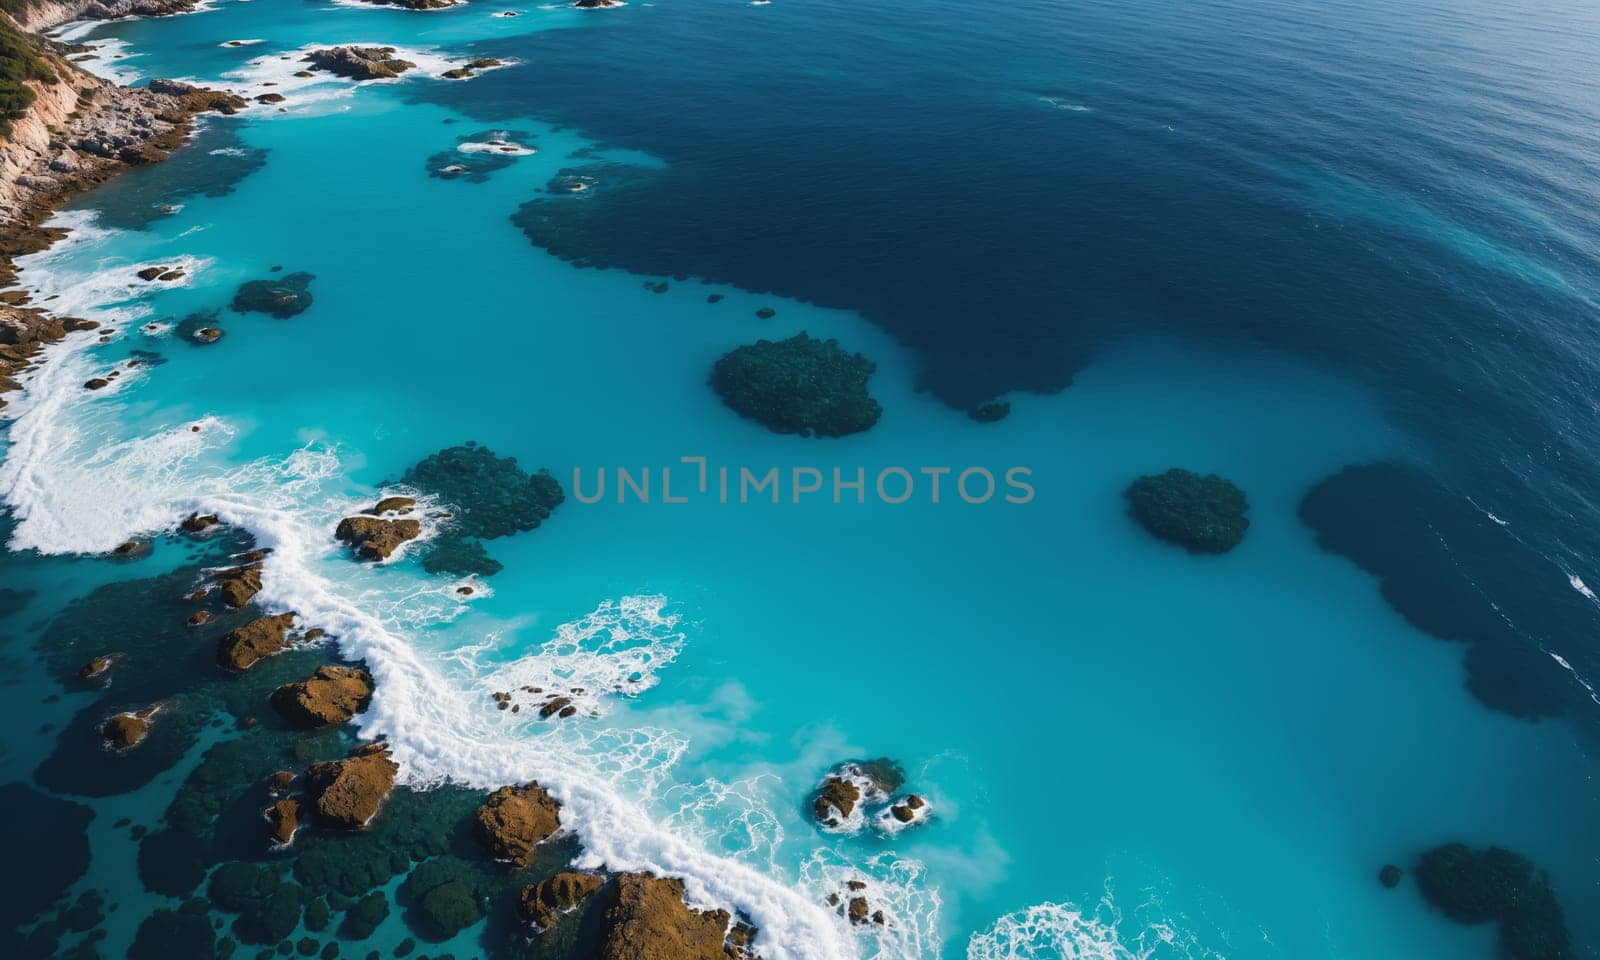 A breathtaking aerial view capturing the vibrant turquoise waters clashing against the rocky shoreline. The image shows the contrast between the deep blue ocean and the lighter turquoise waters near the shore, as well as the texture and shape of the rocks and waves.